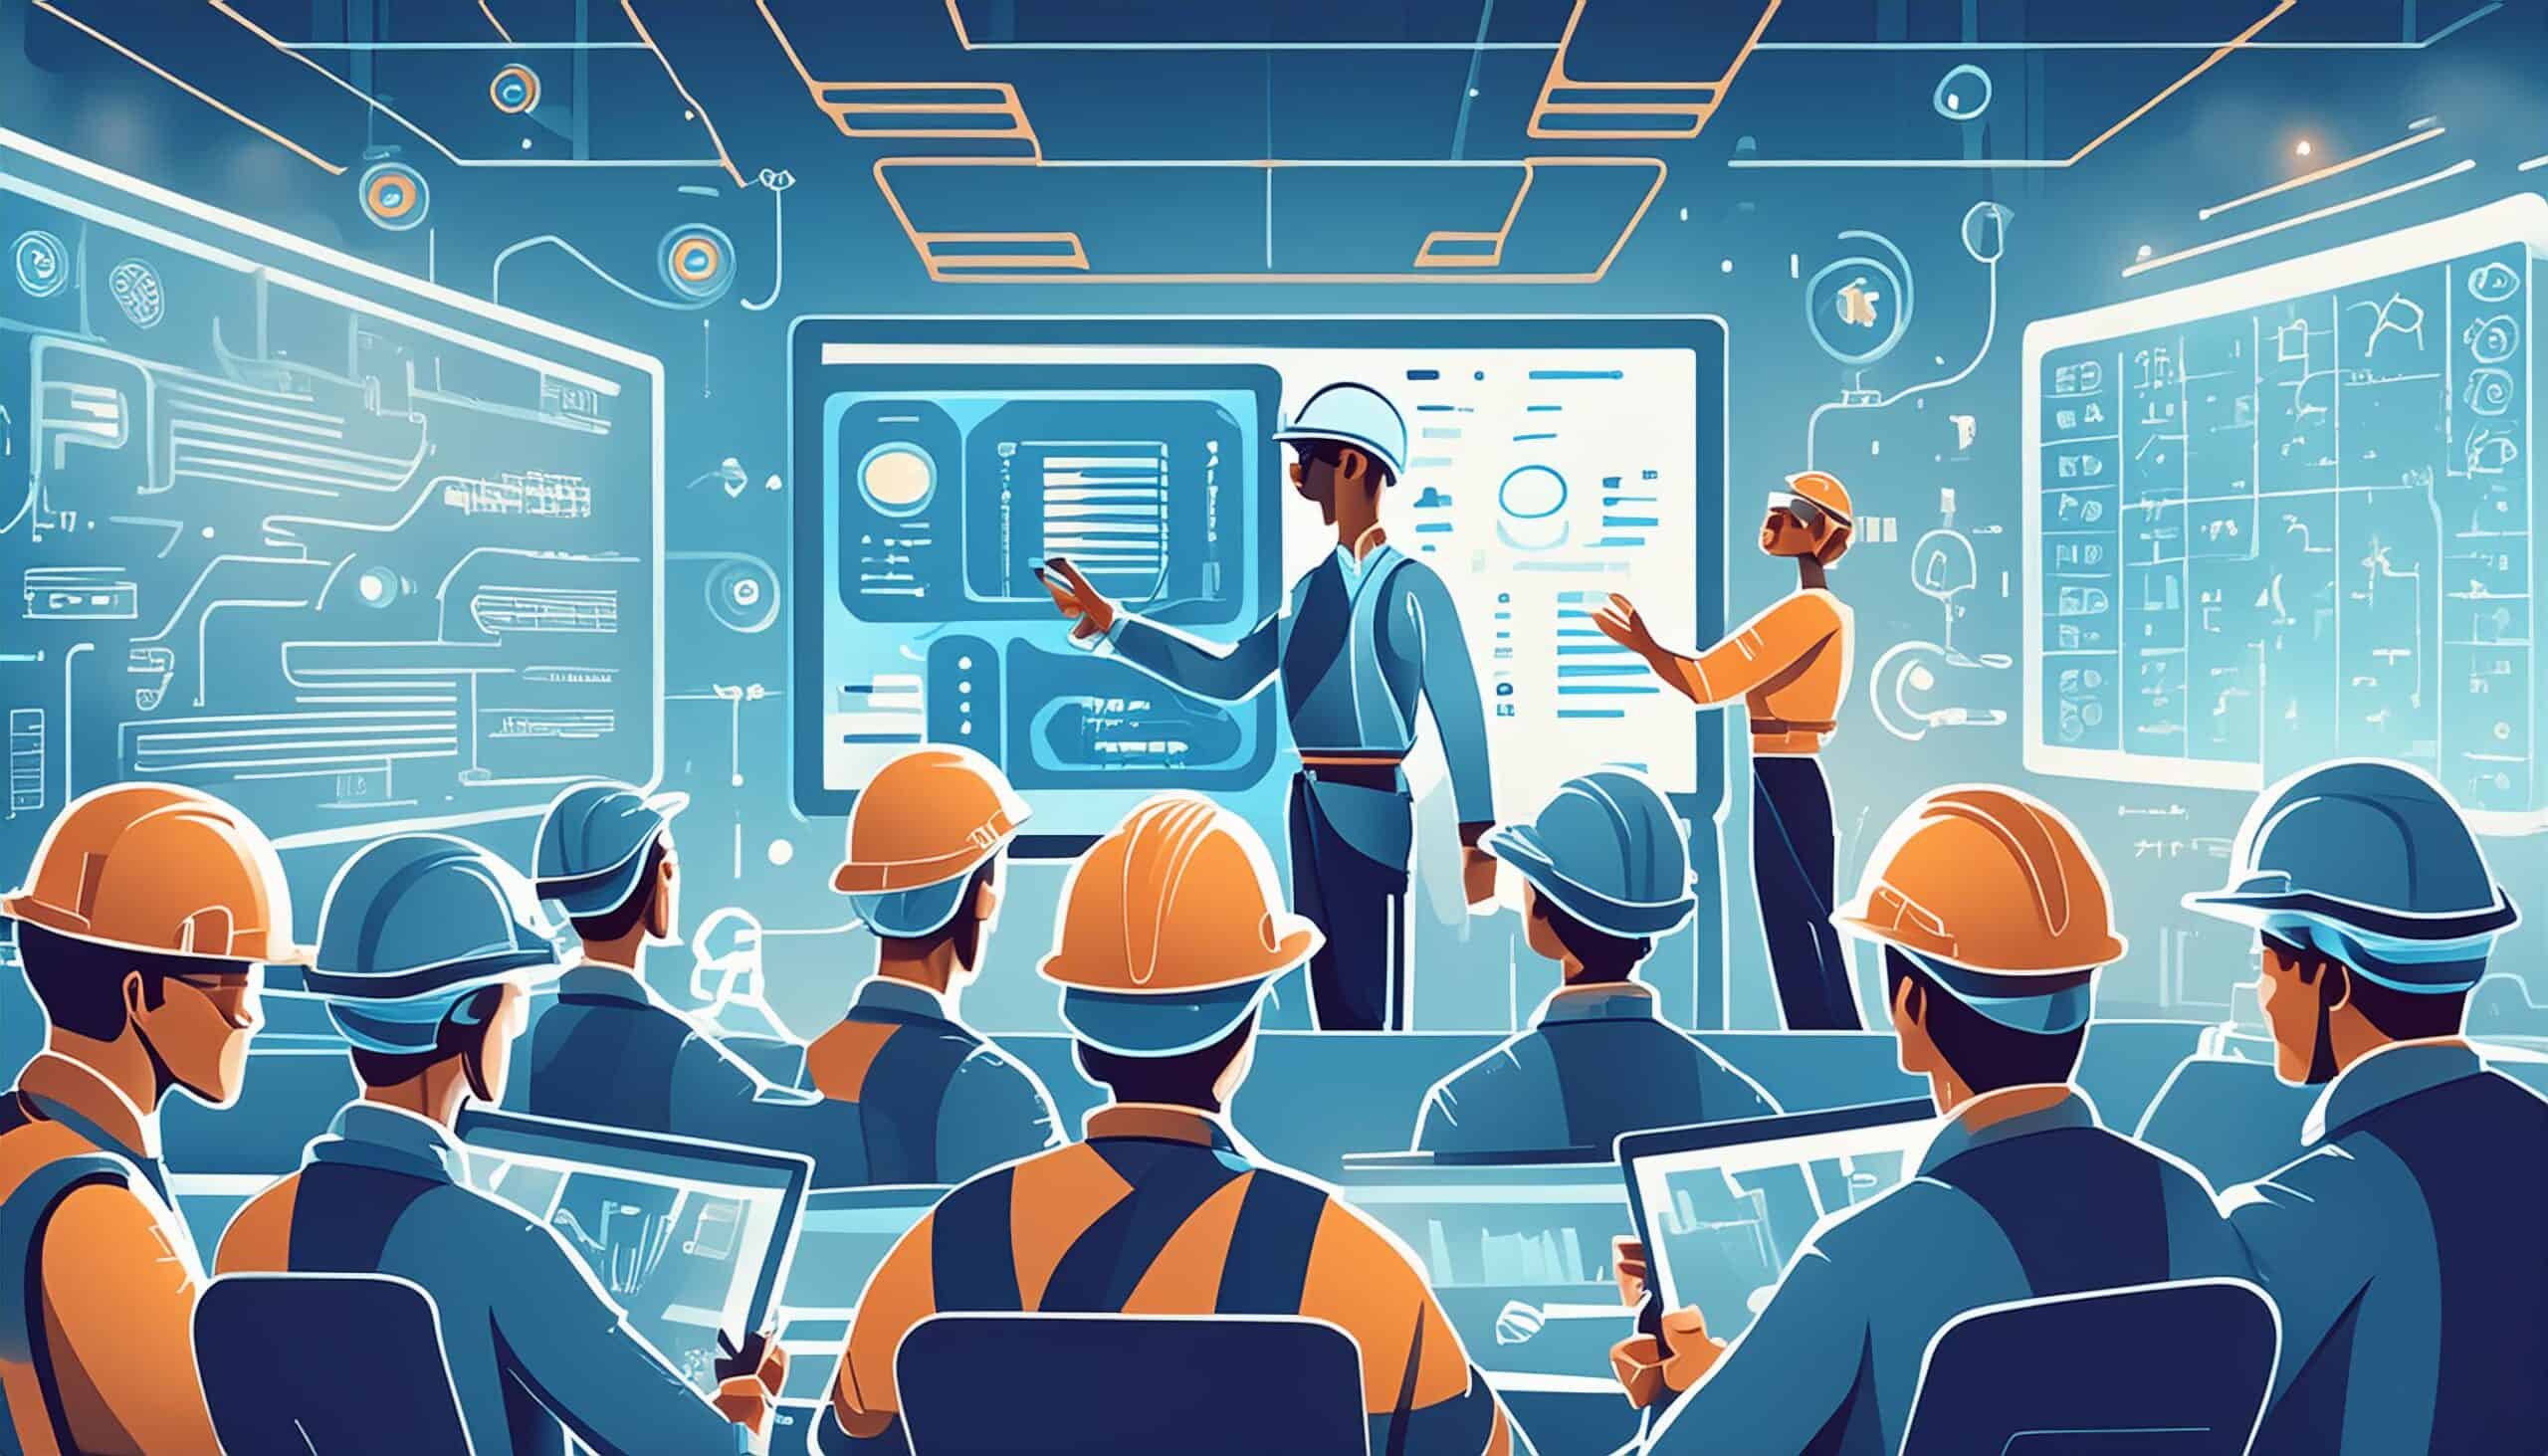 An illustration showing a diverse group of workers in a training session, learning to operate advanced machinery and digital systems. Include elements such as a trainer with a presentation, workers engaging with interactive displays, and a scheduling board showing optimal shift planning. Additionally, depict a positive work environment with engaged and motivated employees collaborating and sharing ideas.